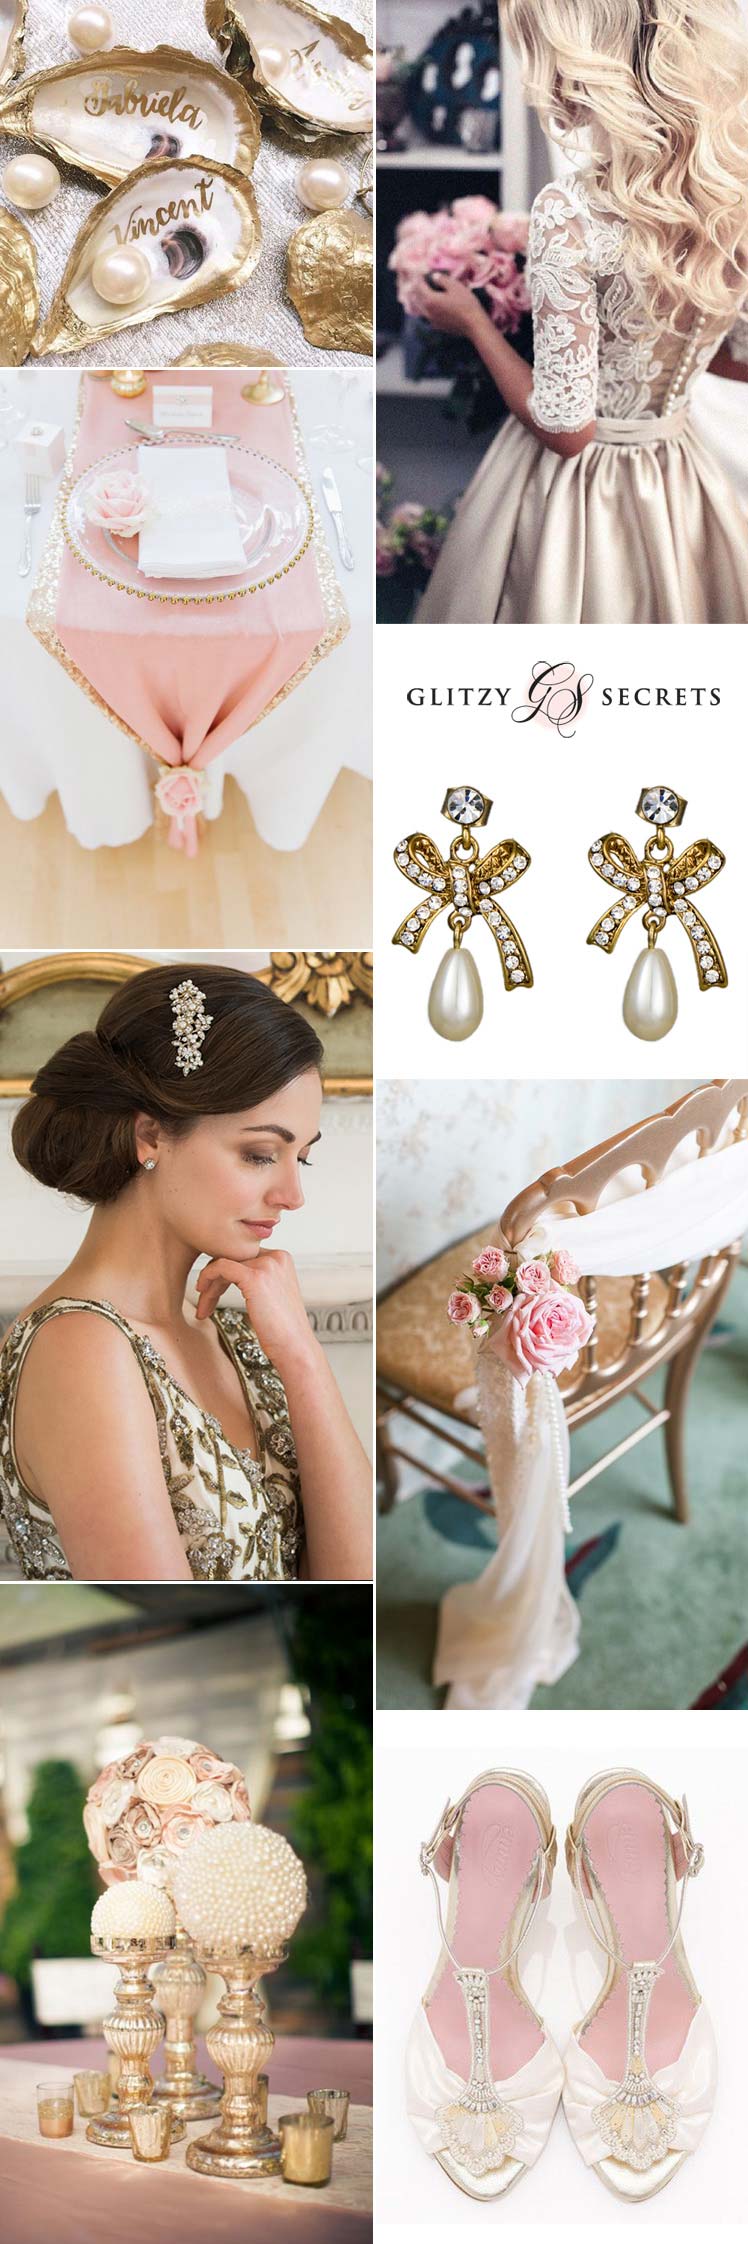 Luxury Gold and Pearl wedding theme inspiration ideas